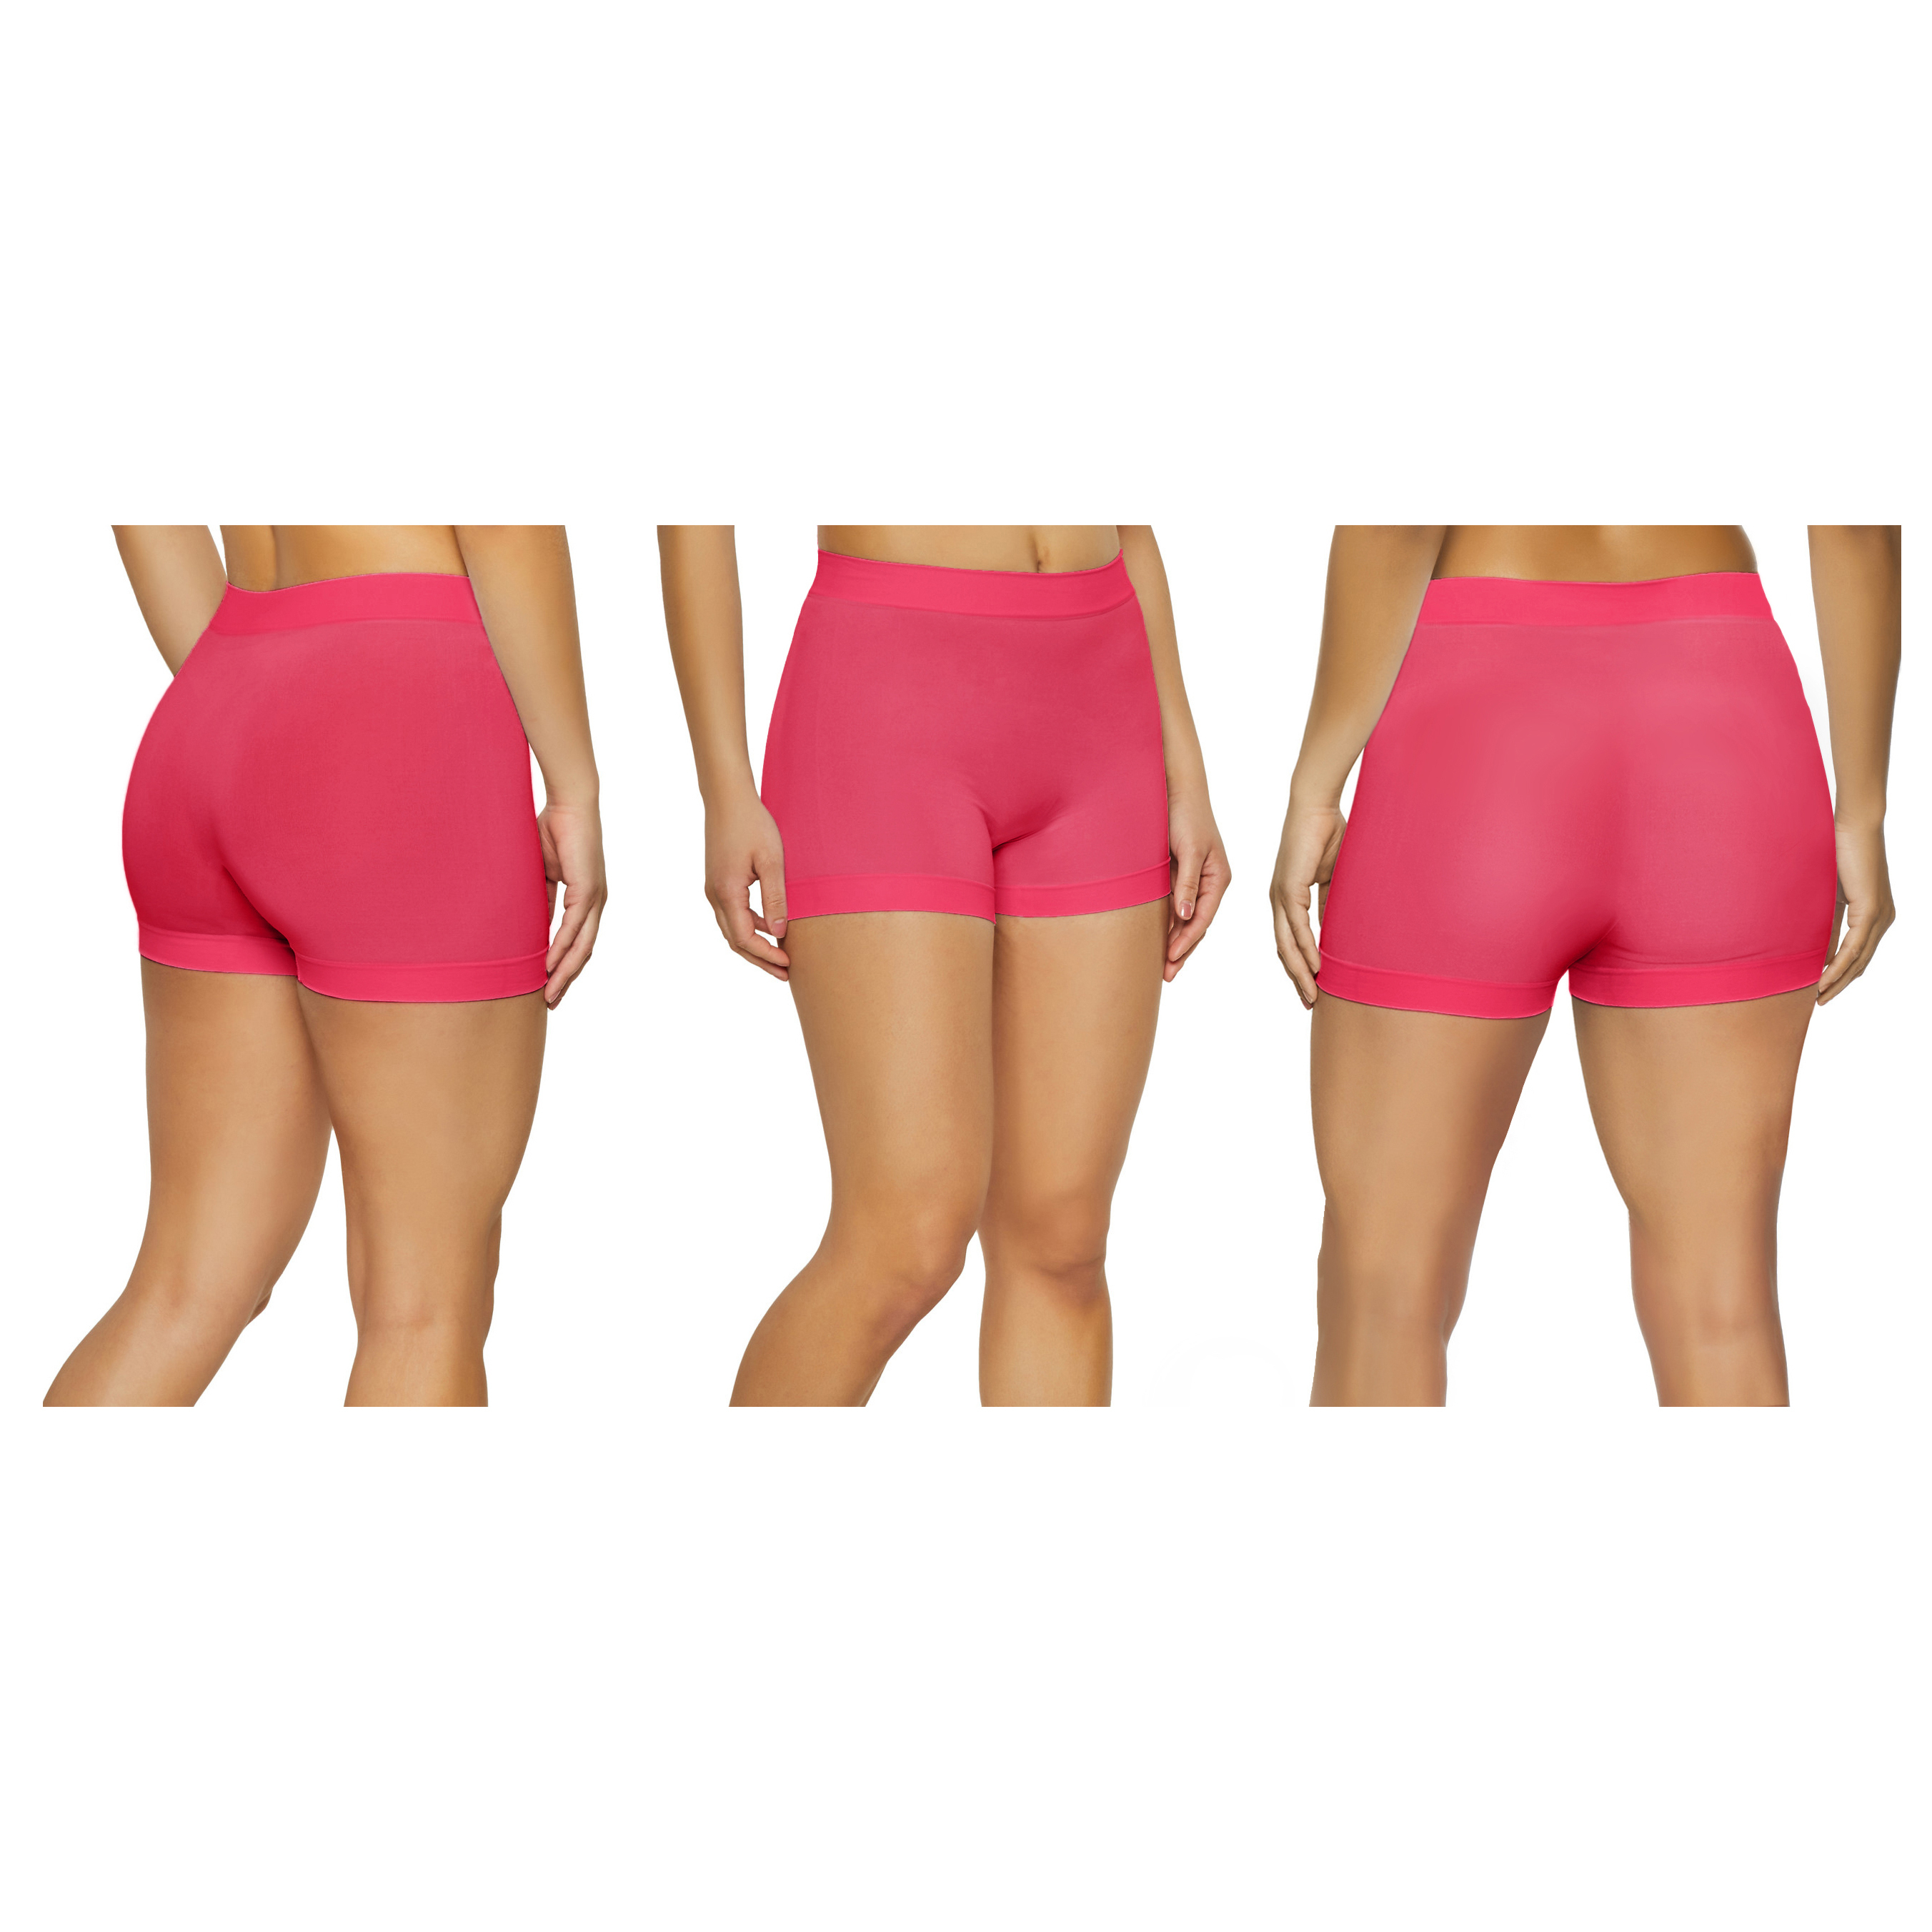 12-Pack Women's High Waisted Biker Bottom Shorts For Yoga Gym Running Ladies Pants - CORAL, L